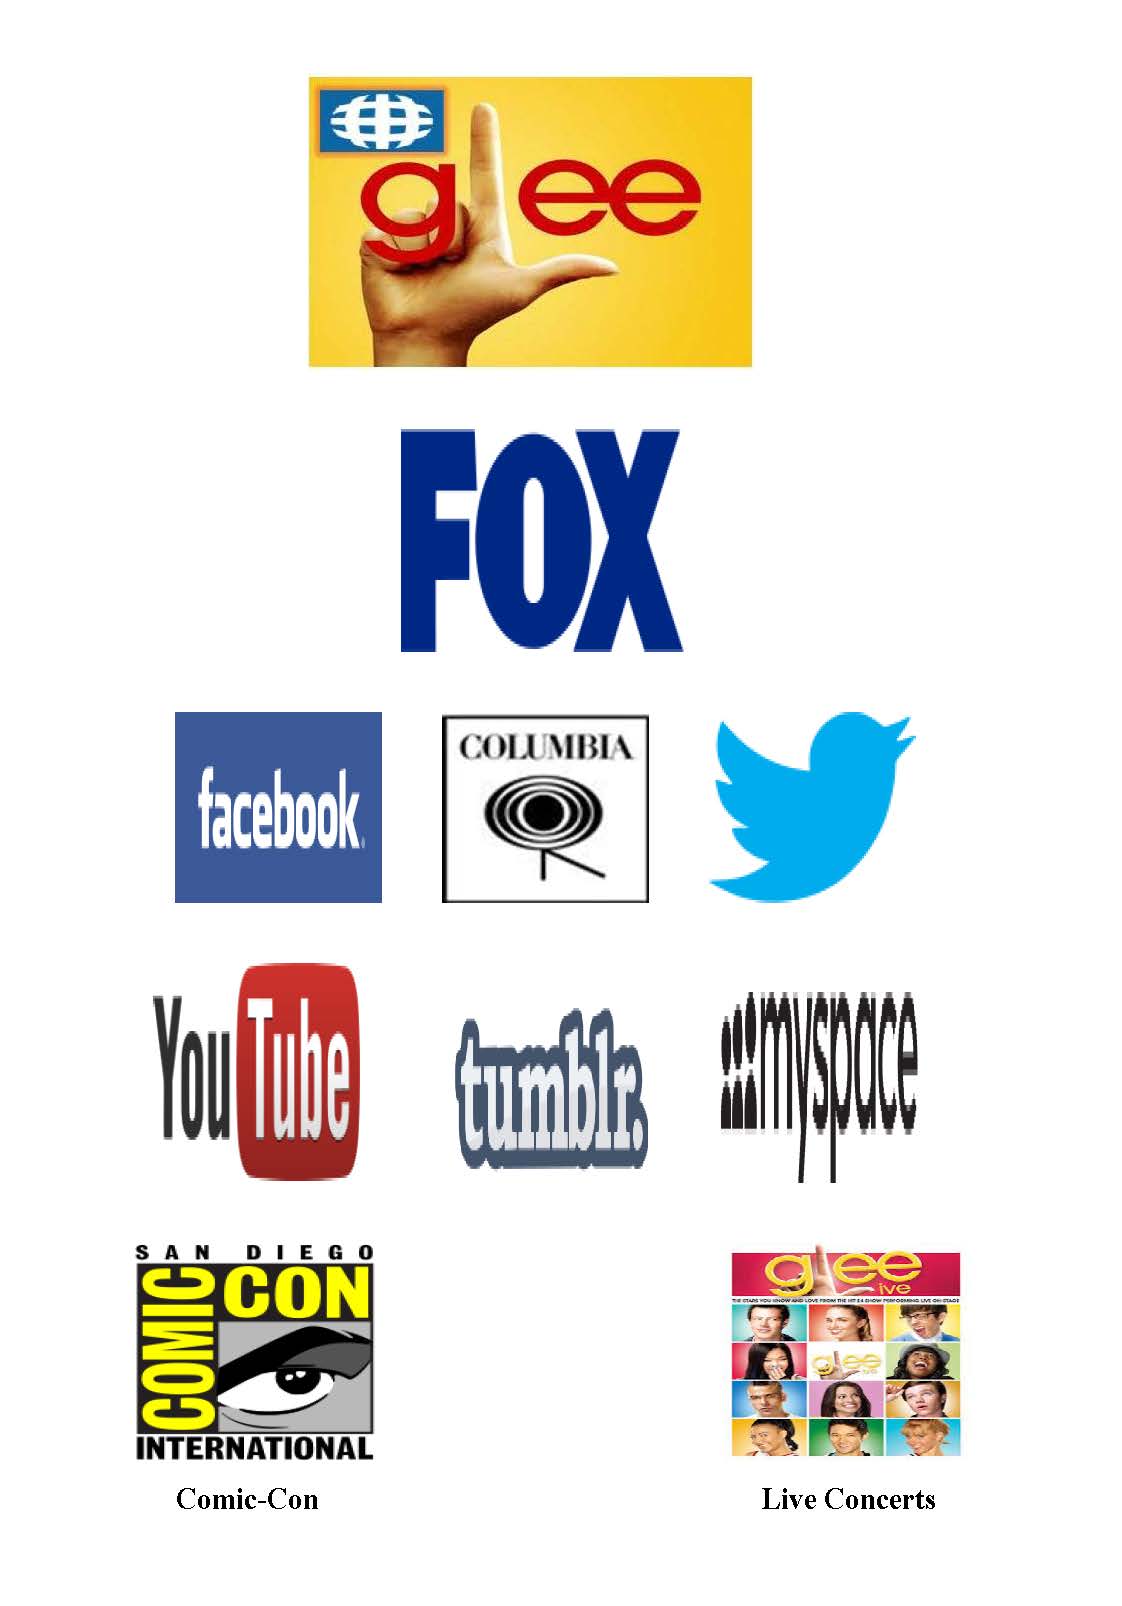 A collection of logos for Glee, the Fox television network, facebook, Columbia Pictures, Twitter, YouTube, tumblr, Myspace, San Diego Comic-Con, and Glee live concerts